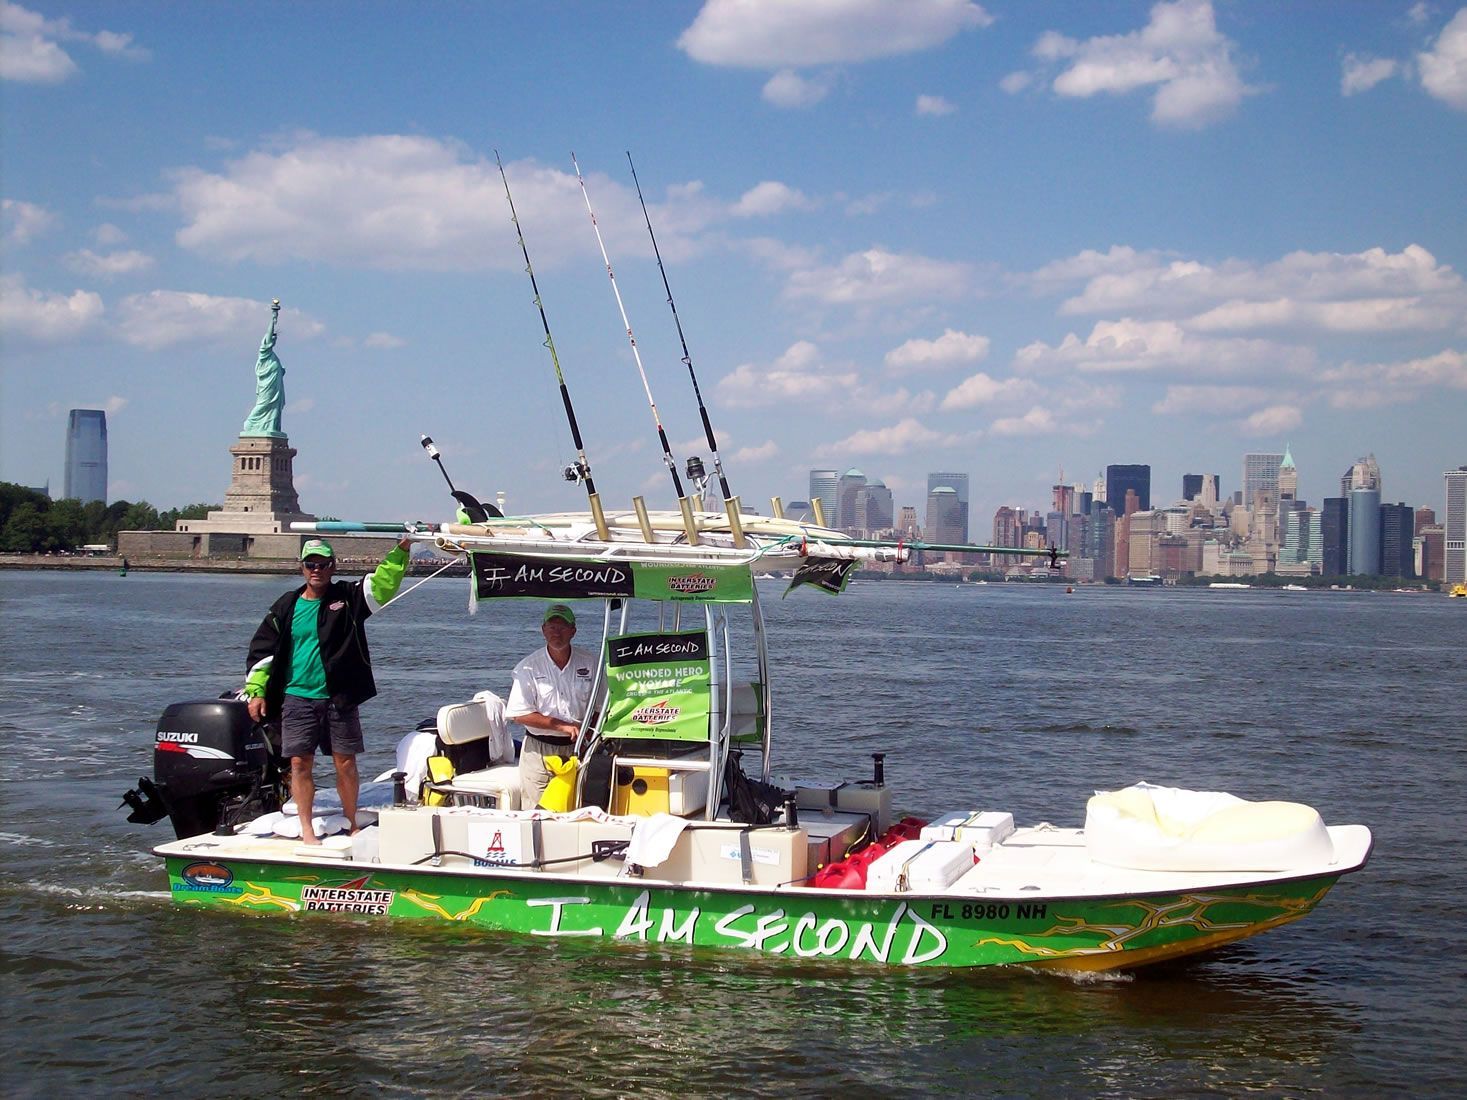 The First Flats Boat to Cross The Atlantic Ocean Unassisted, world record set by Ralph Brown and Robert Brown
